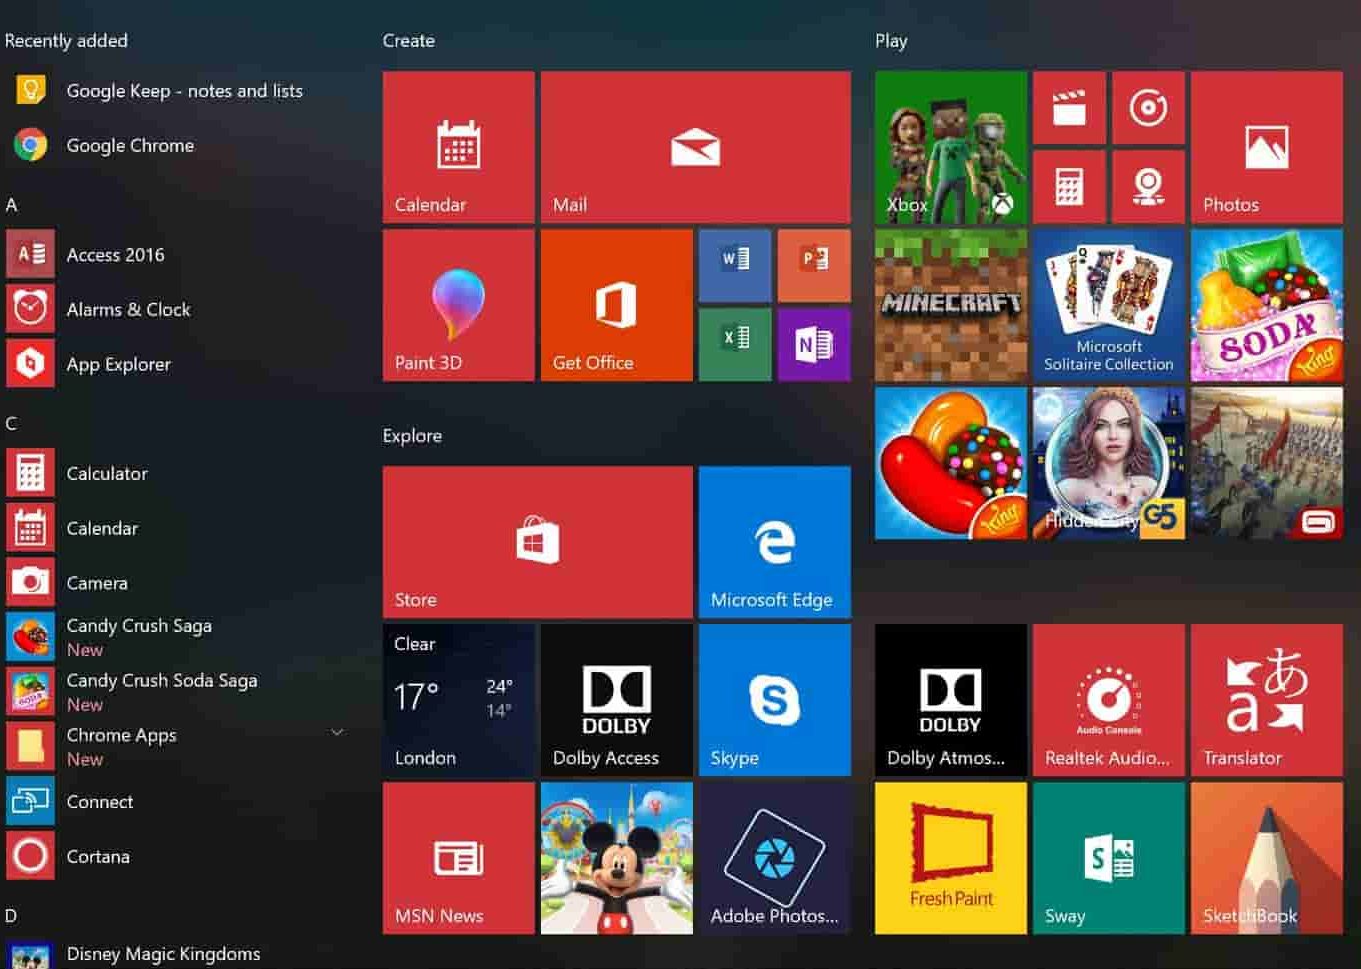 how to remove bloatware from windows, how to uninstall bloatware from windows, uninstall bloatware from windows, remove bloatware from windows, uninstall bloatware in windows, remove bloatware in windows